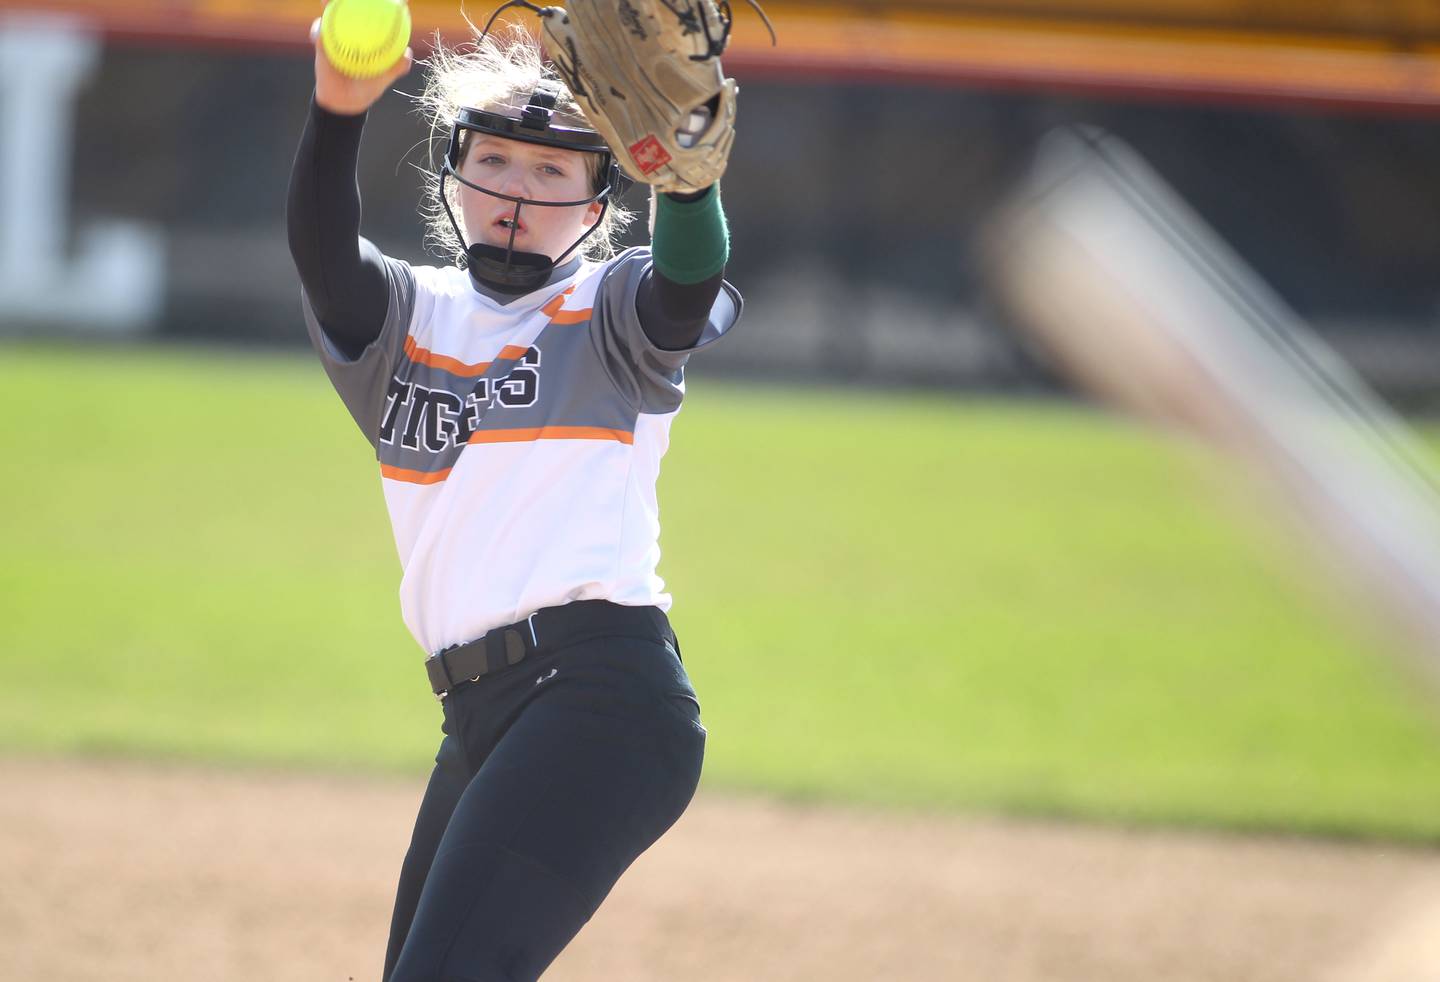 Wheaton Warrenville South’s Maddie Pool pitches during a home game against St. Charles North on Thursday, April 14, 2022.